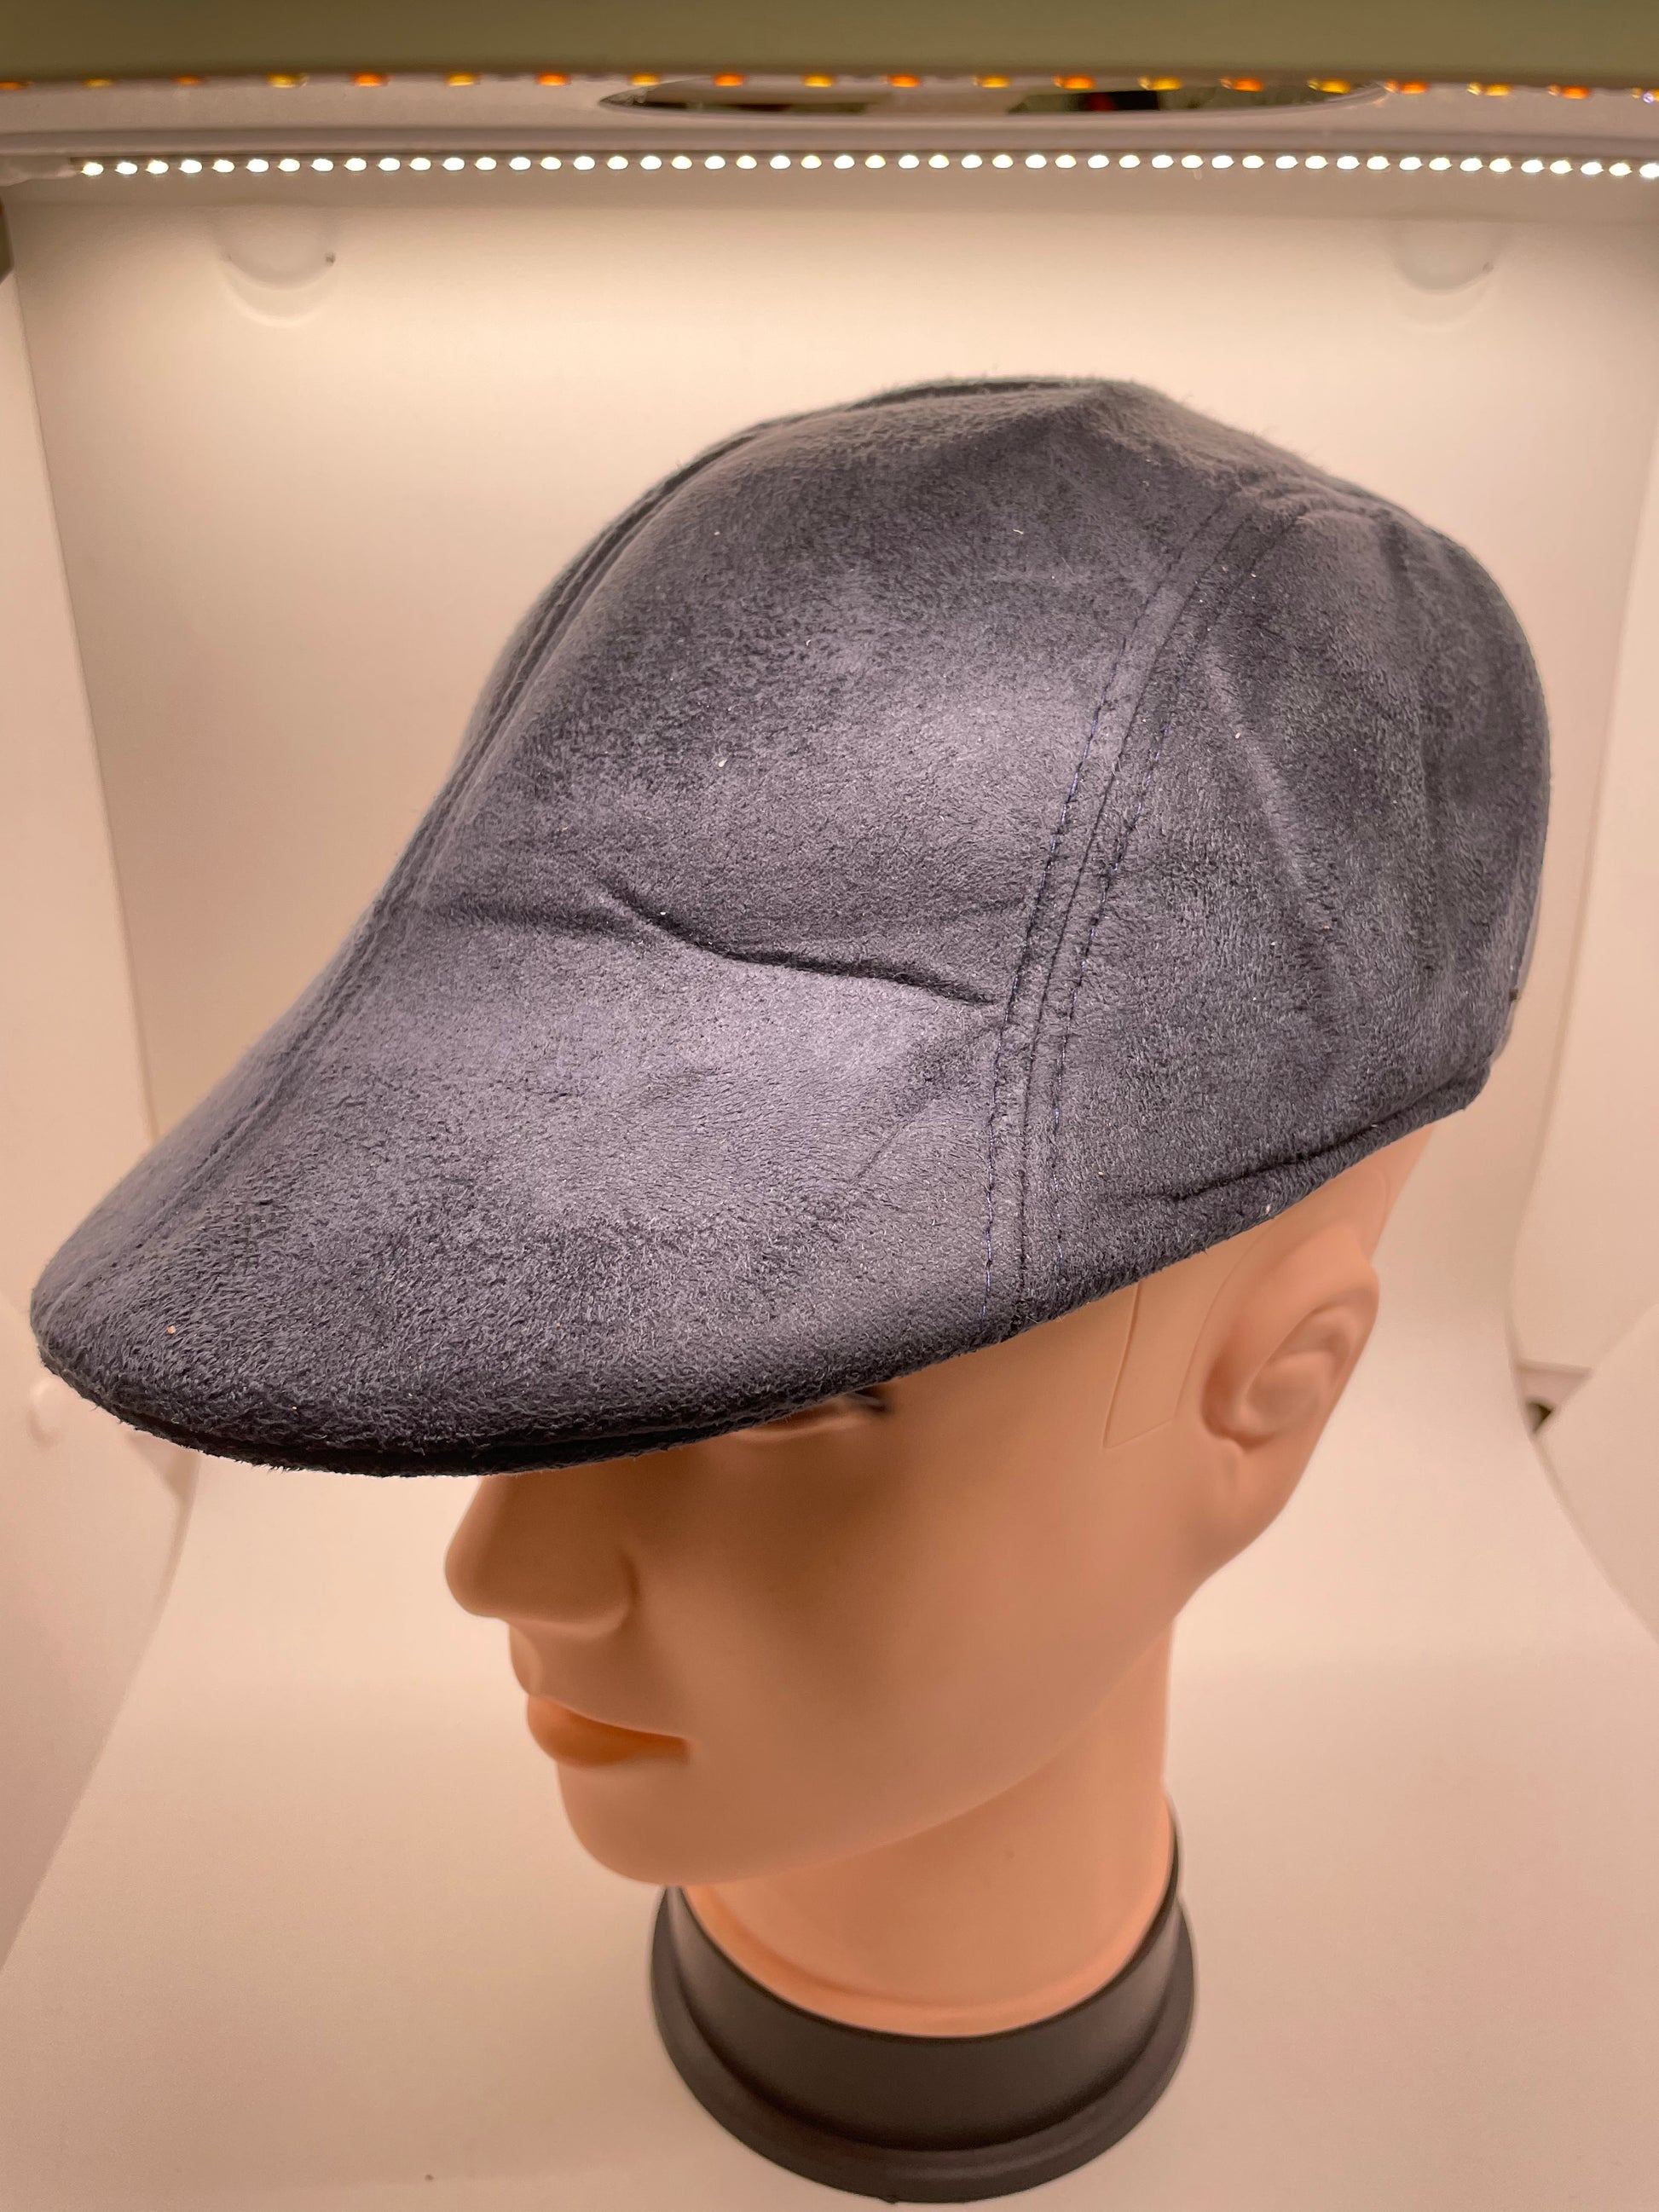 Navy blue flat hat with a quilted texture and a drawstring closure